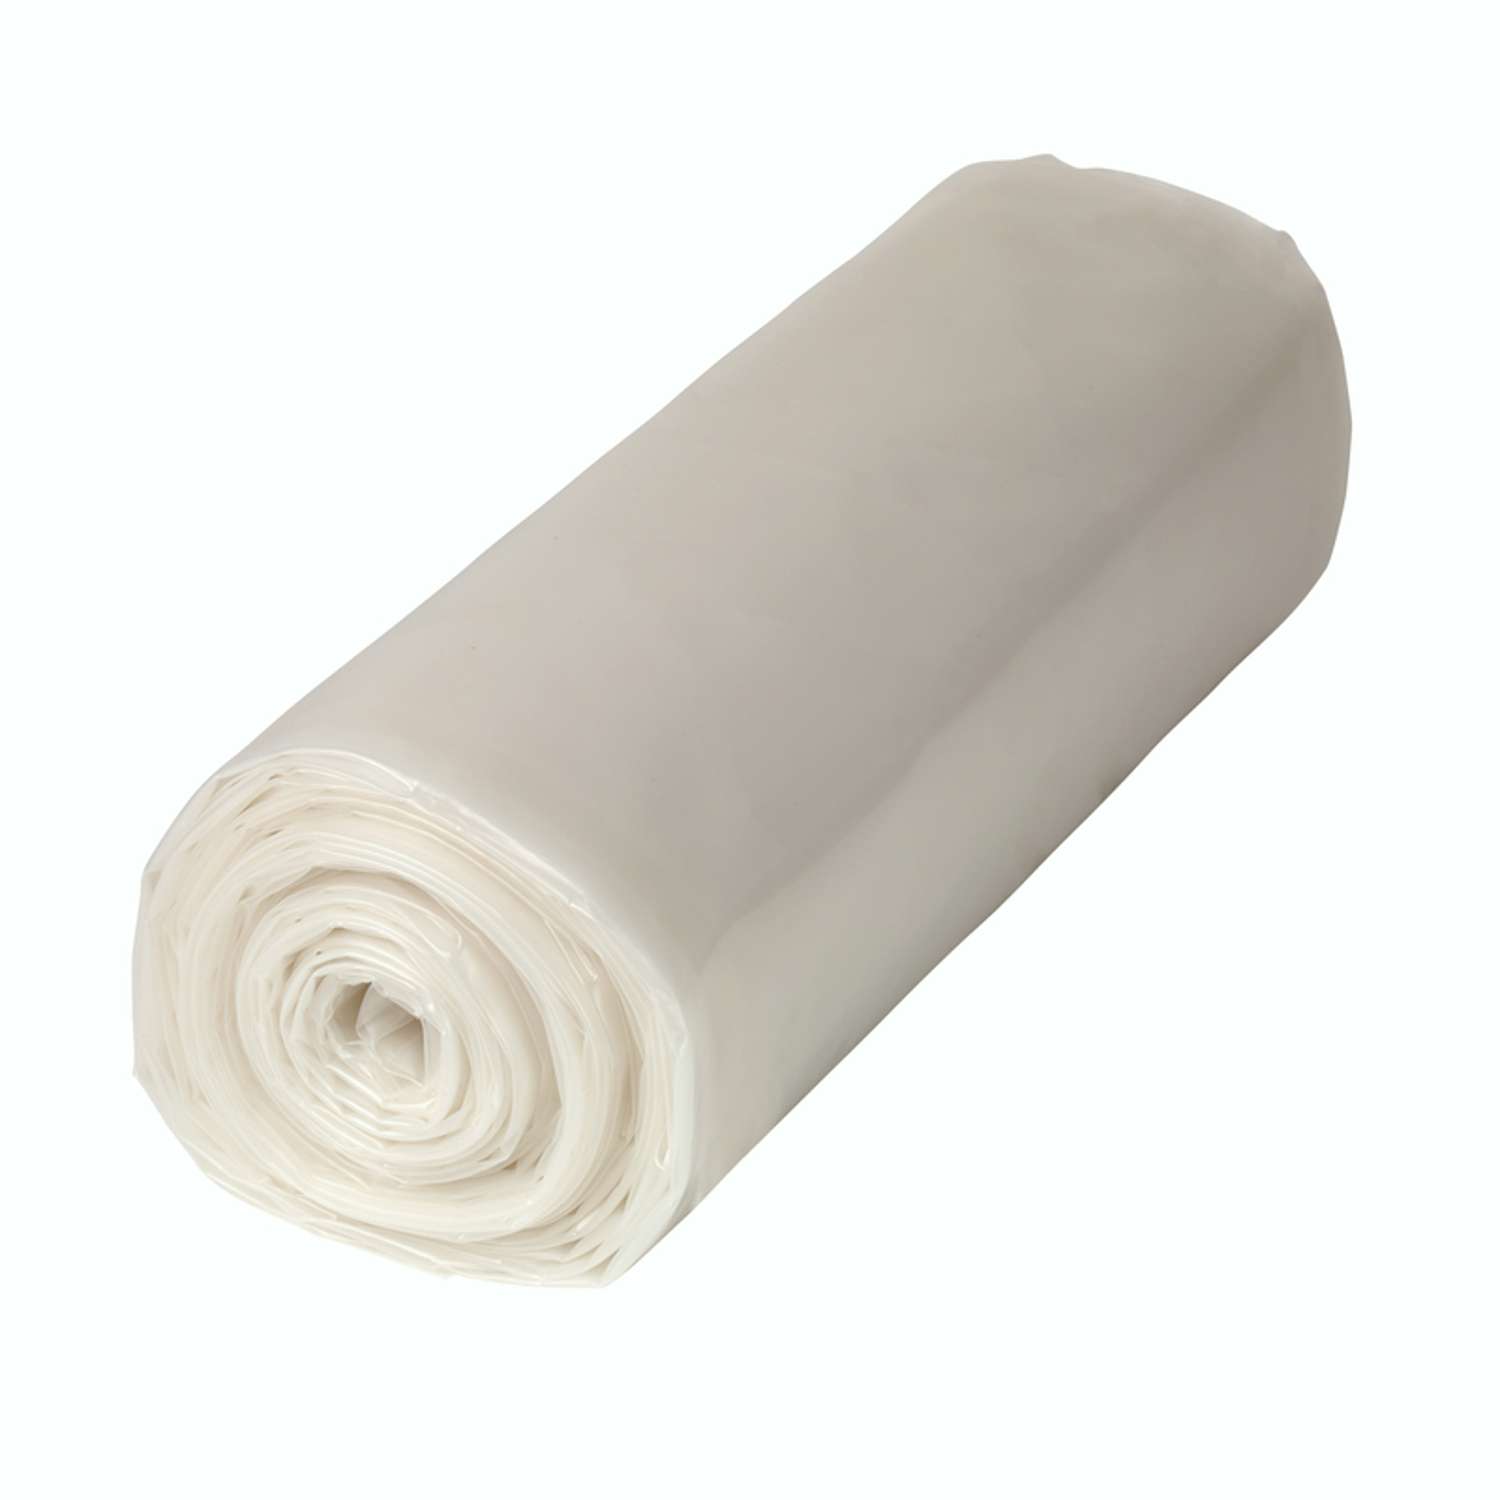 Frost King Clear Vinyl Sheeting Roll For Doors and Windows 25 ft. L X 4 mil  - Ace Hardware